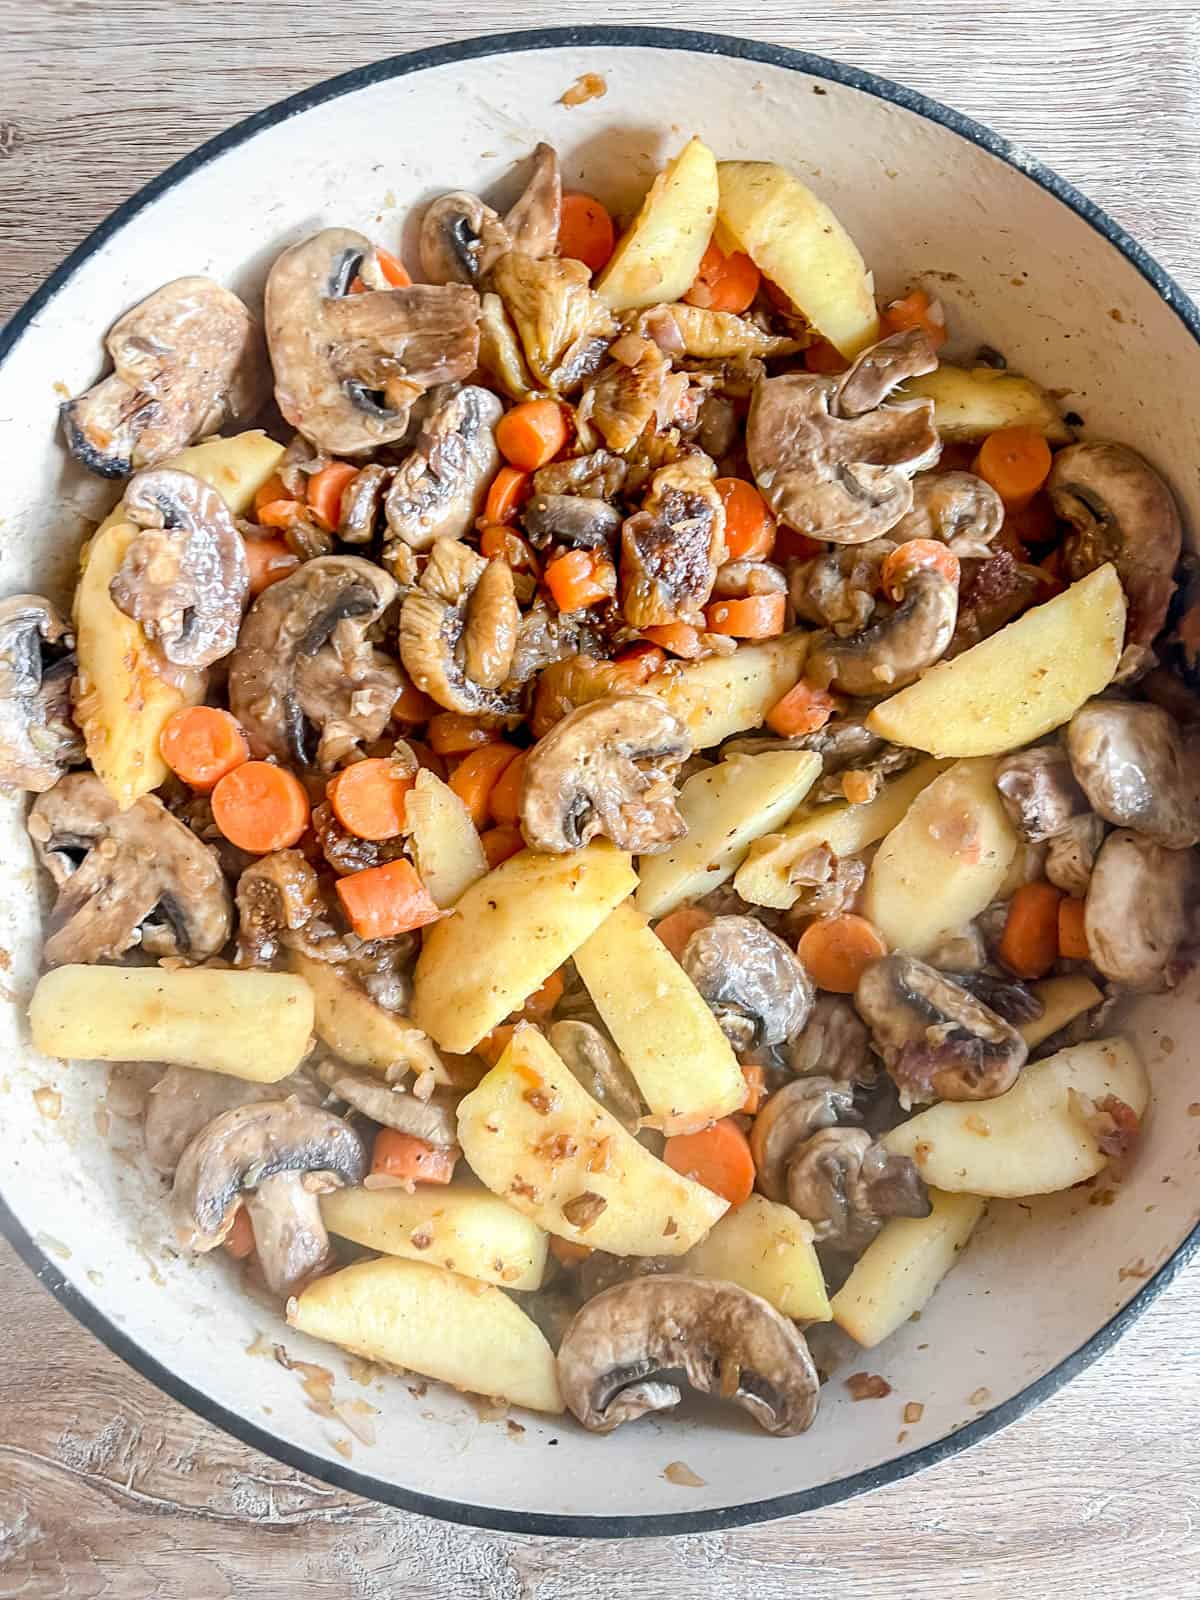 Apples, carrots, mushrooms, and figs added to a dutch oven.